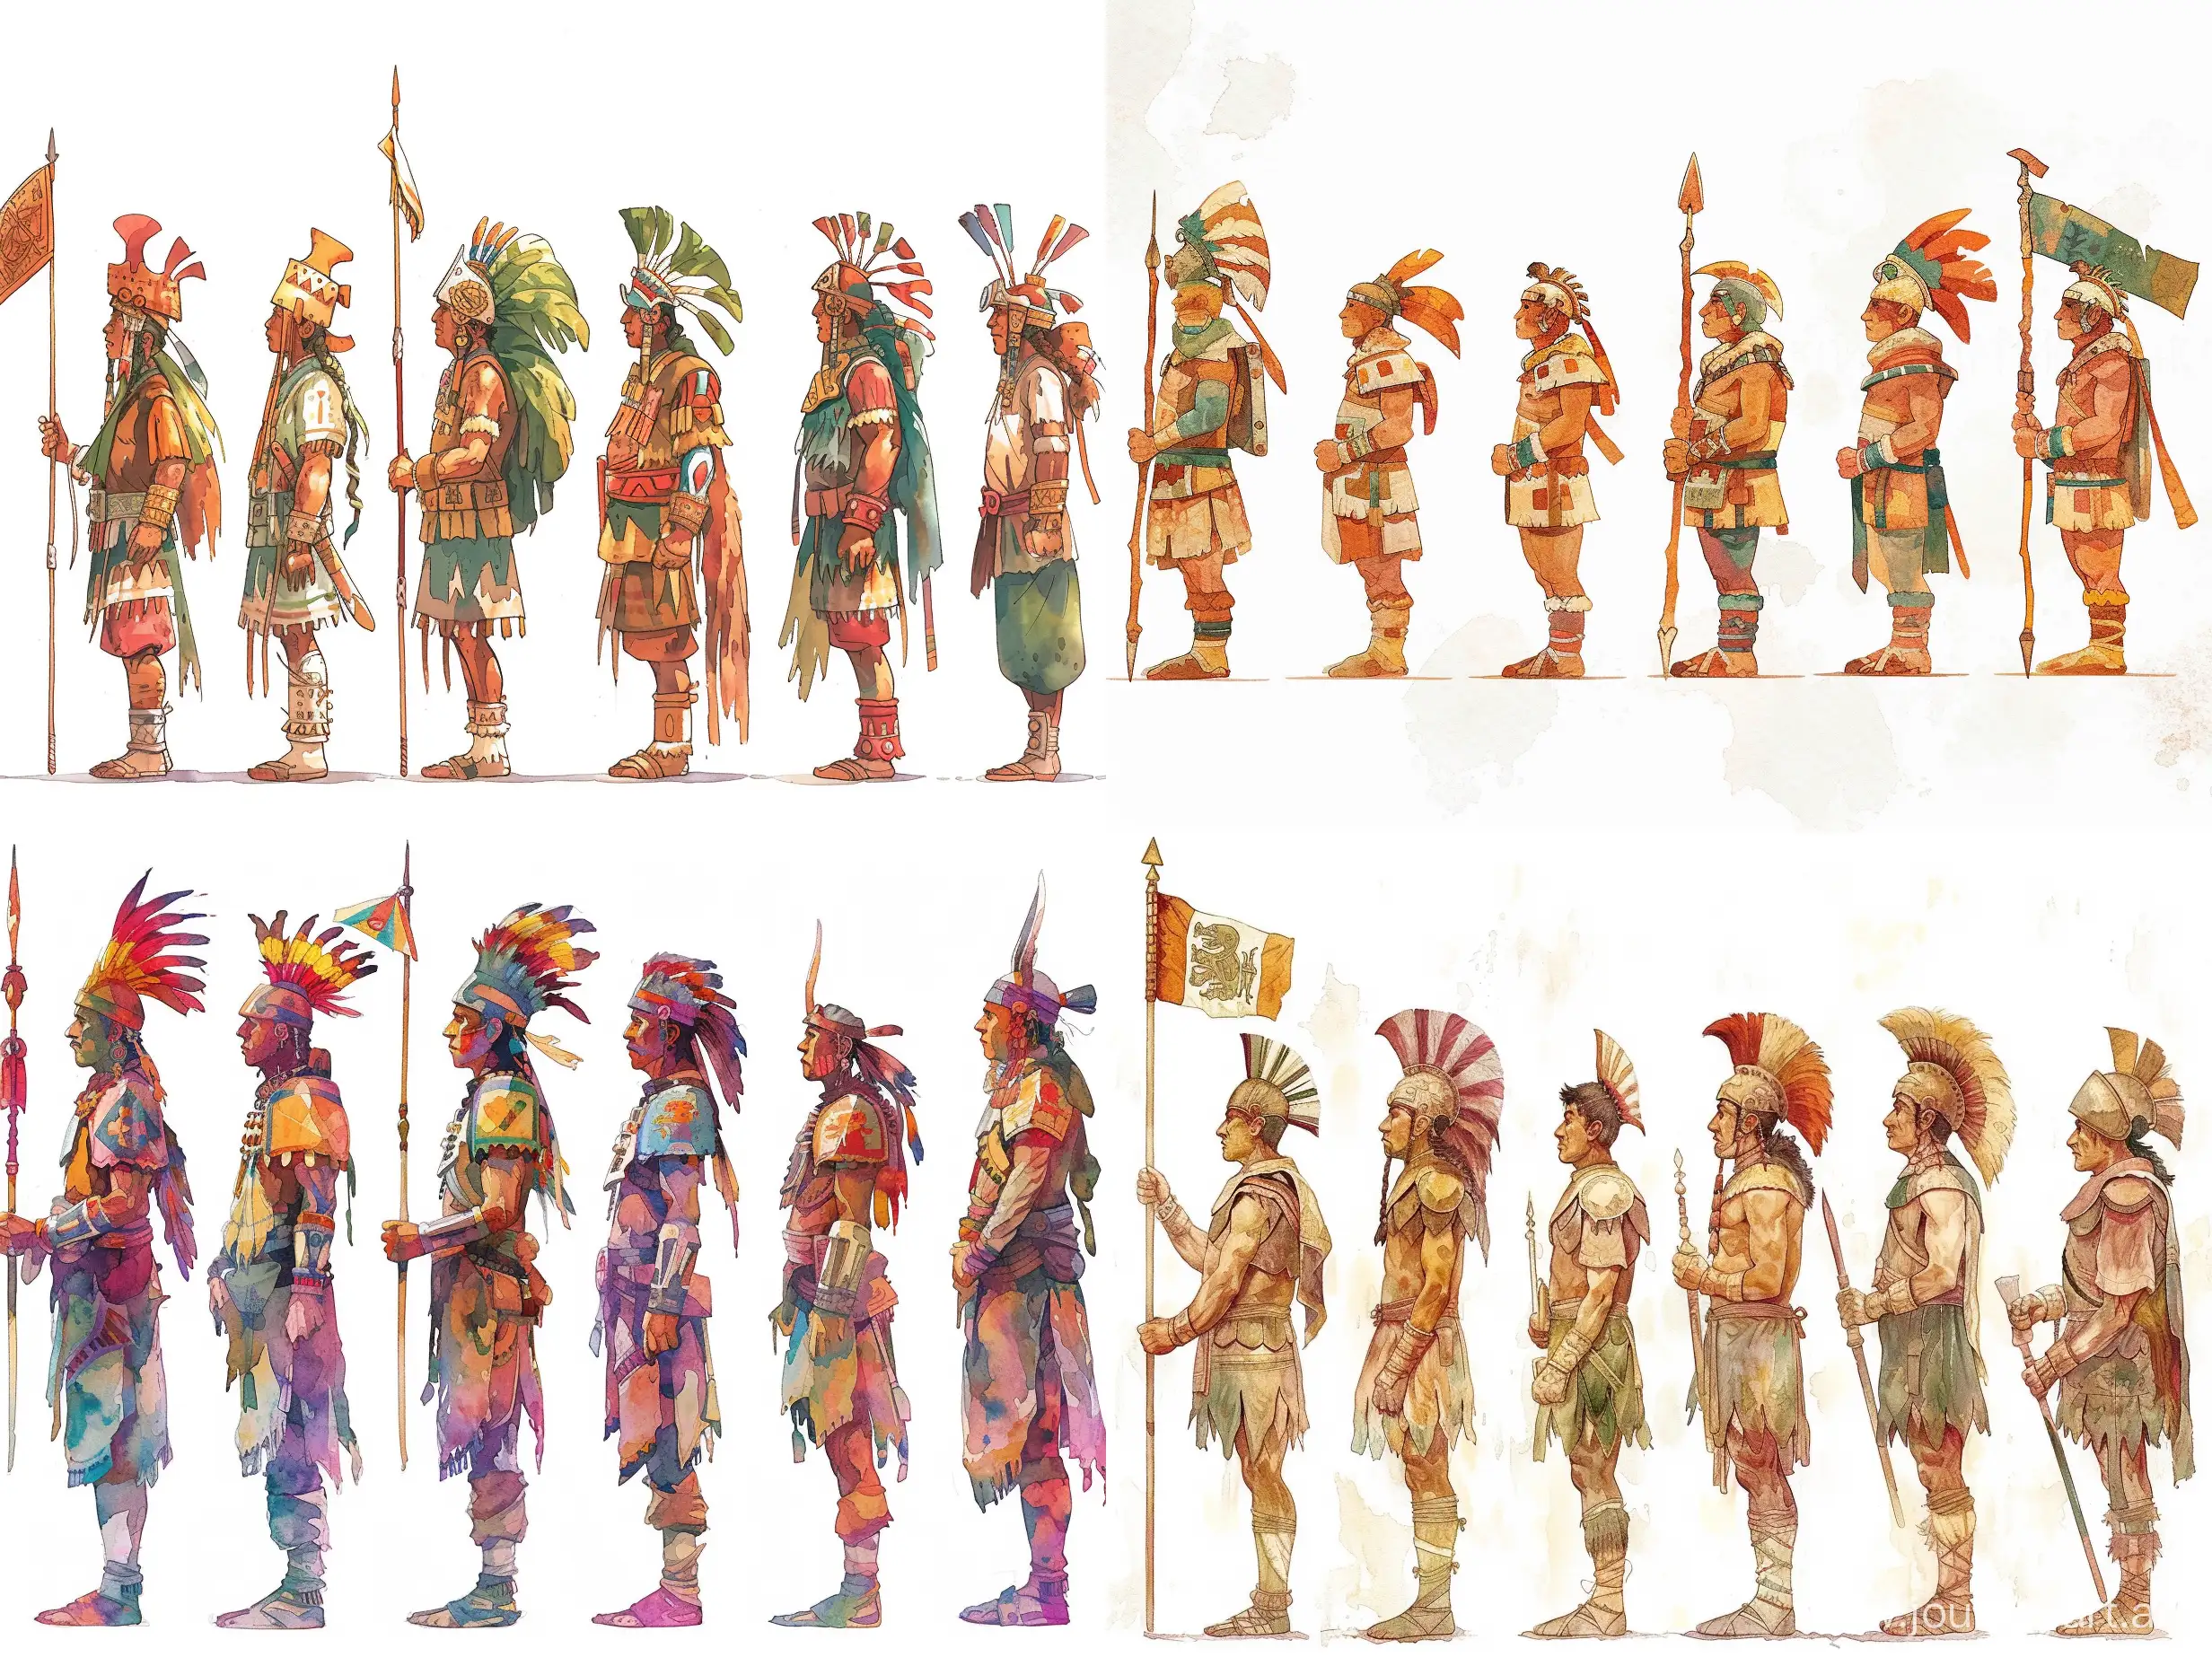 Ancient-Aztec-Warriors-Holding-Flags-Six-Stylized-Caricatures-in-Decorative-Watercolor